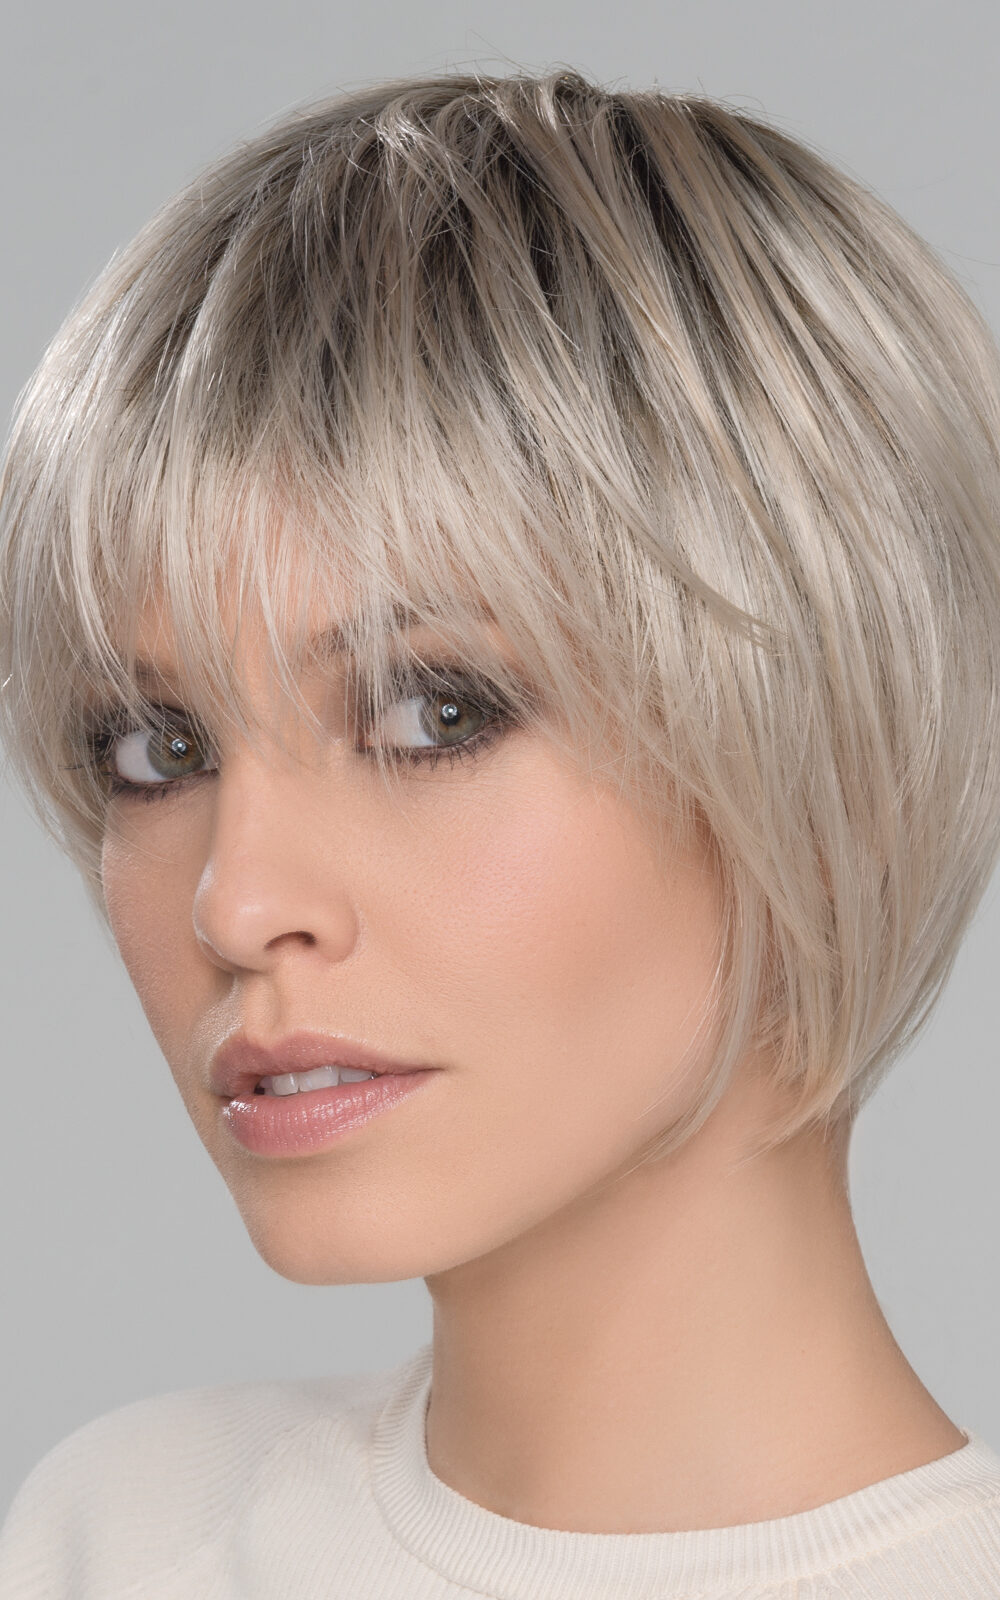 With soft layers that frame around the face. Edgy, with pieced out bangs and lots of personality